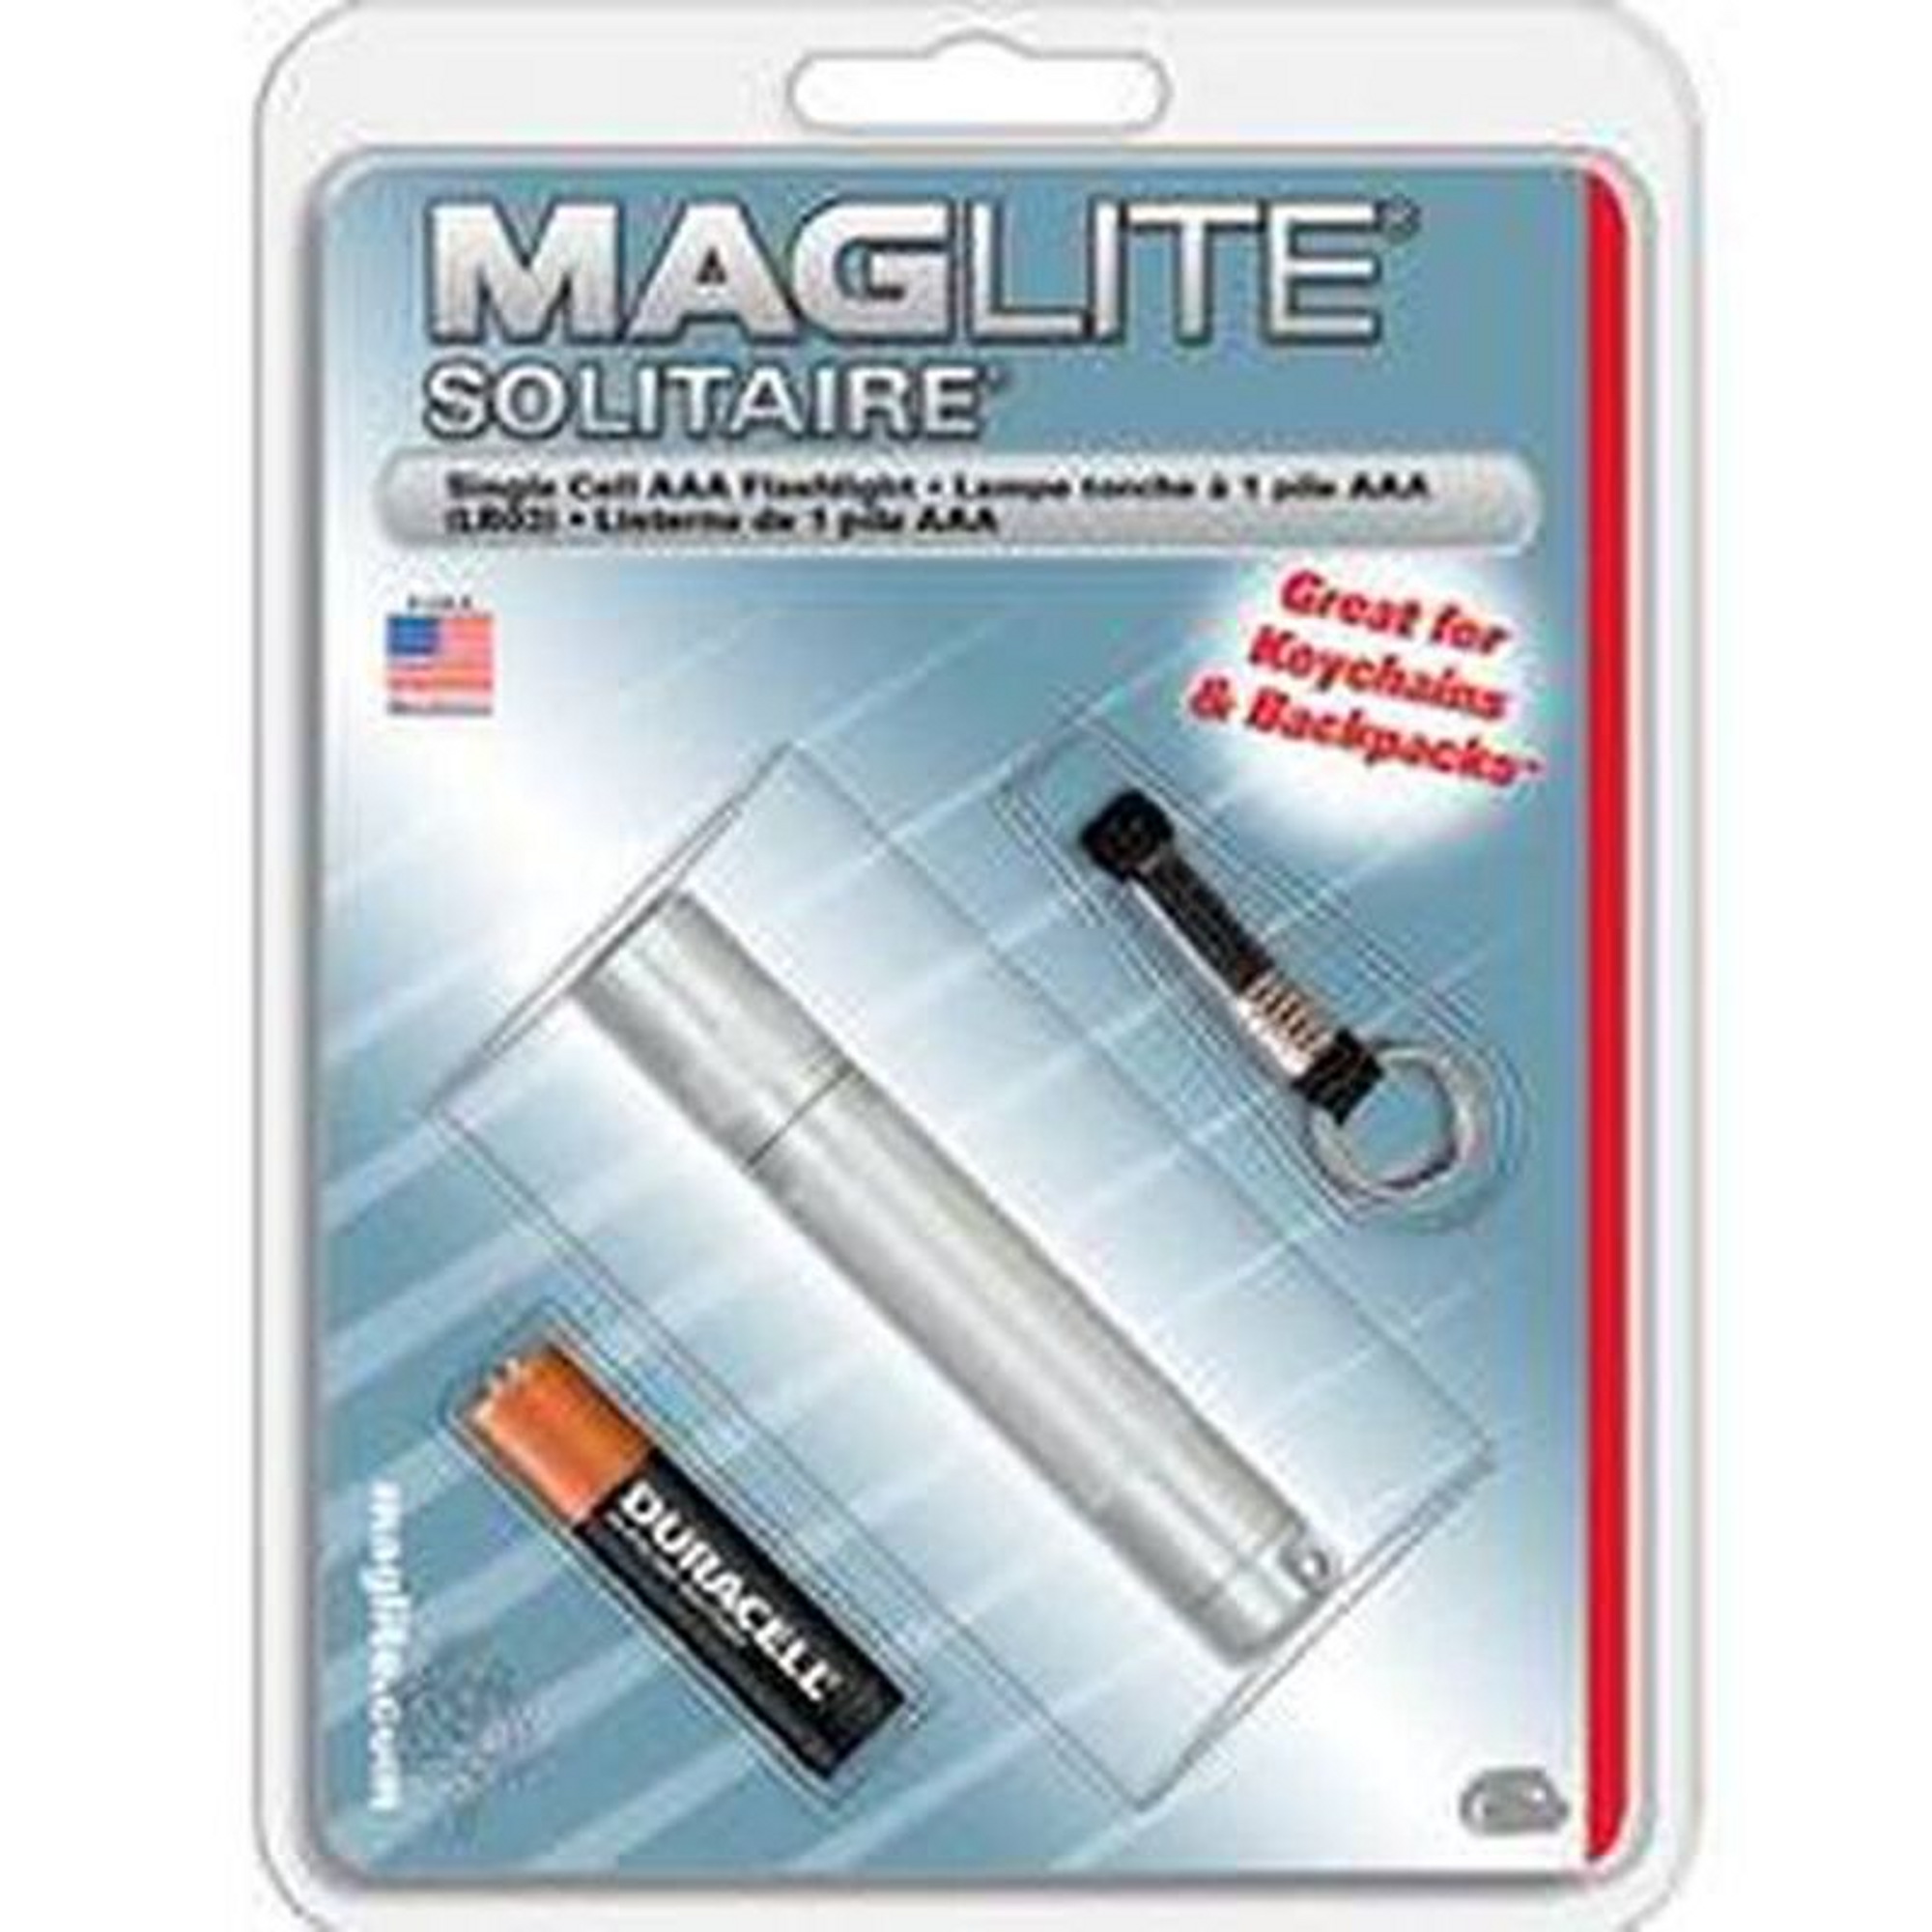 Solitaire Aaa-cell Incandescent Flashlight - KRK3A106